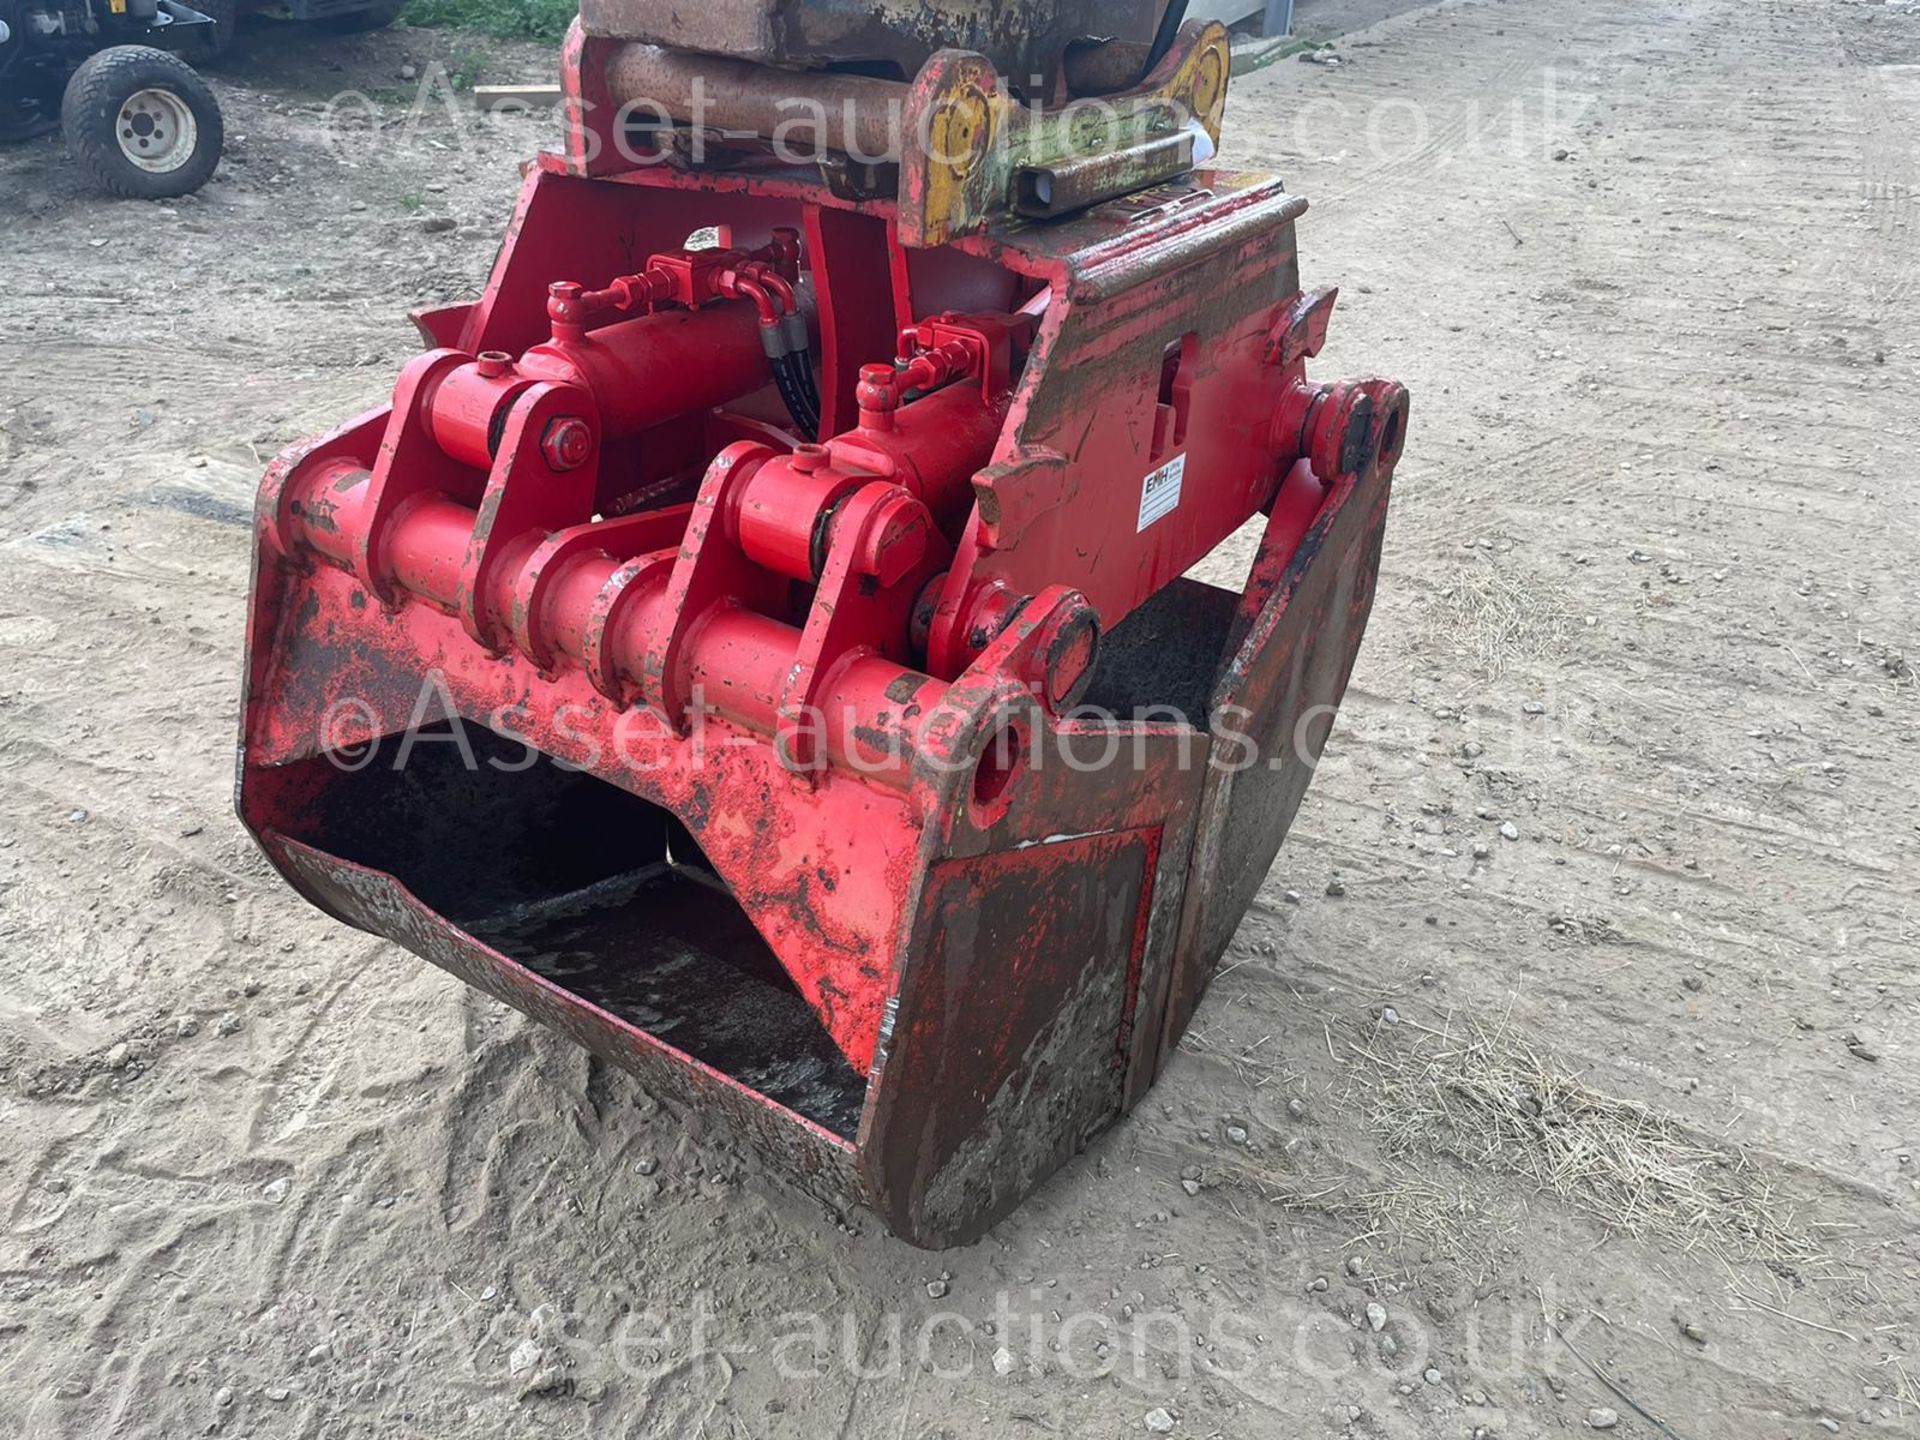 HYDRAULIC RED SHELL GRAB, SUITABLE FOR A LARGE EXCAVATOR, HYDRAULIC DRIVEN, 65mm PINS *PLUS VAT* - Image 5 of 16